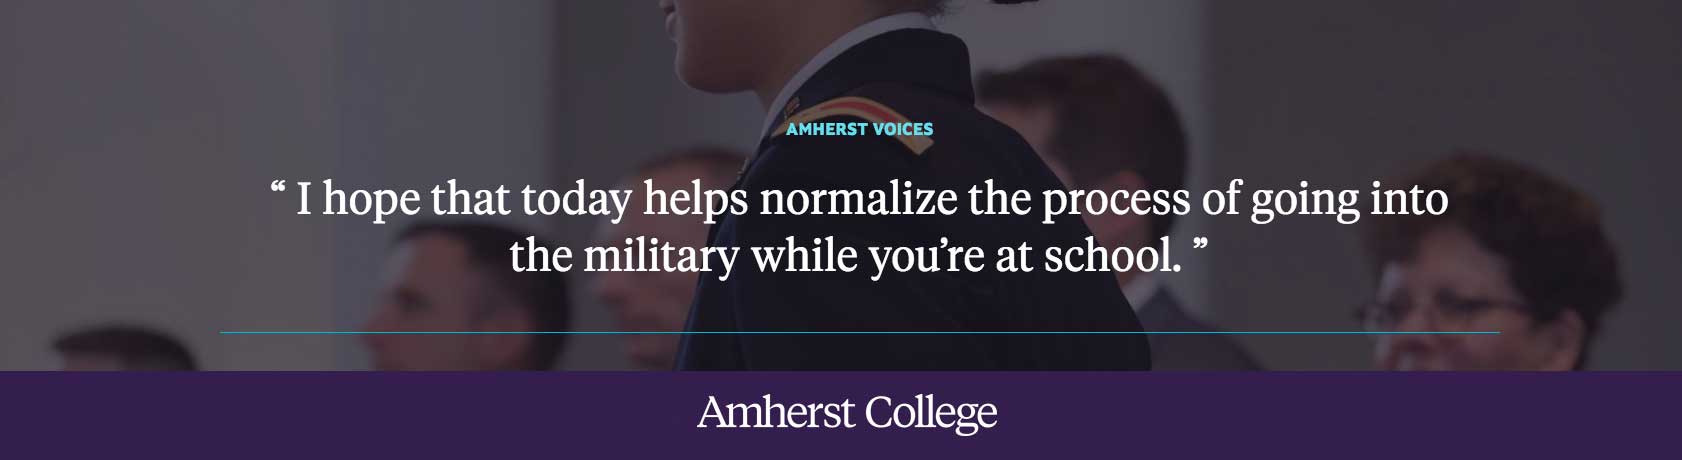 Rebecca Segal: "I hope that today helps normalize the process of going into the military while you're at school."